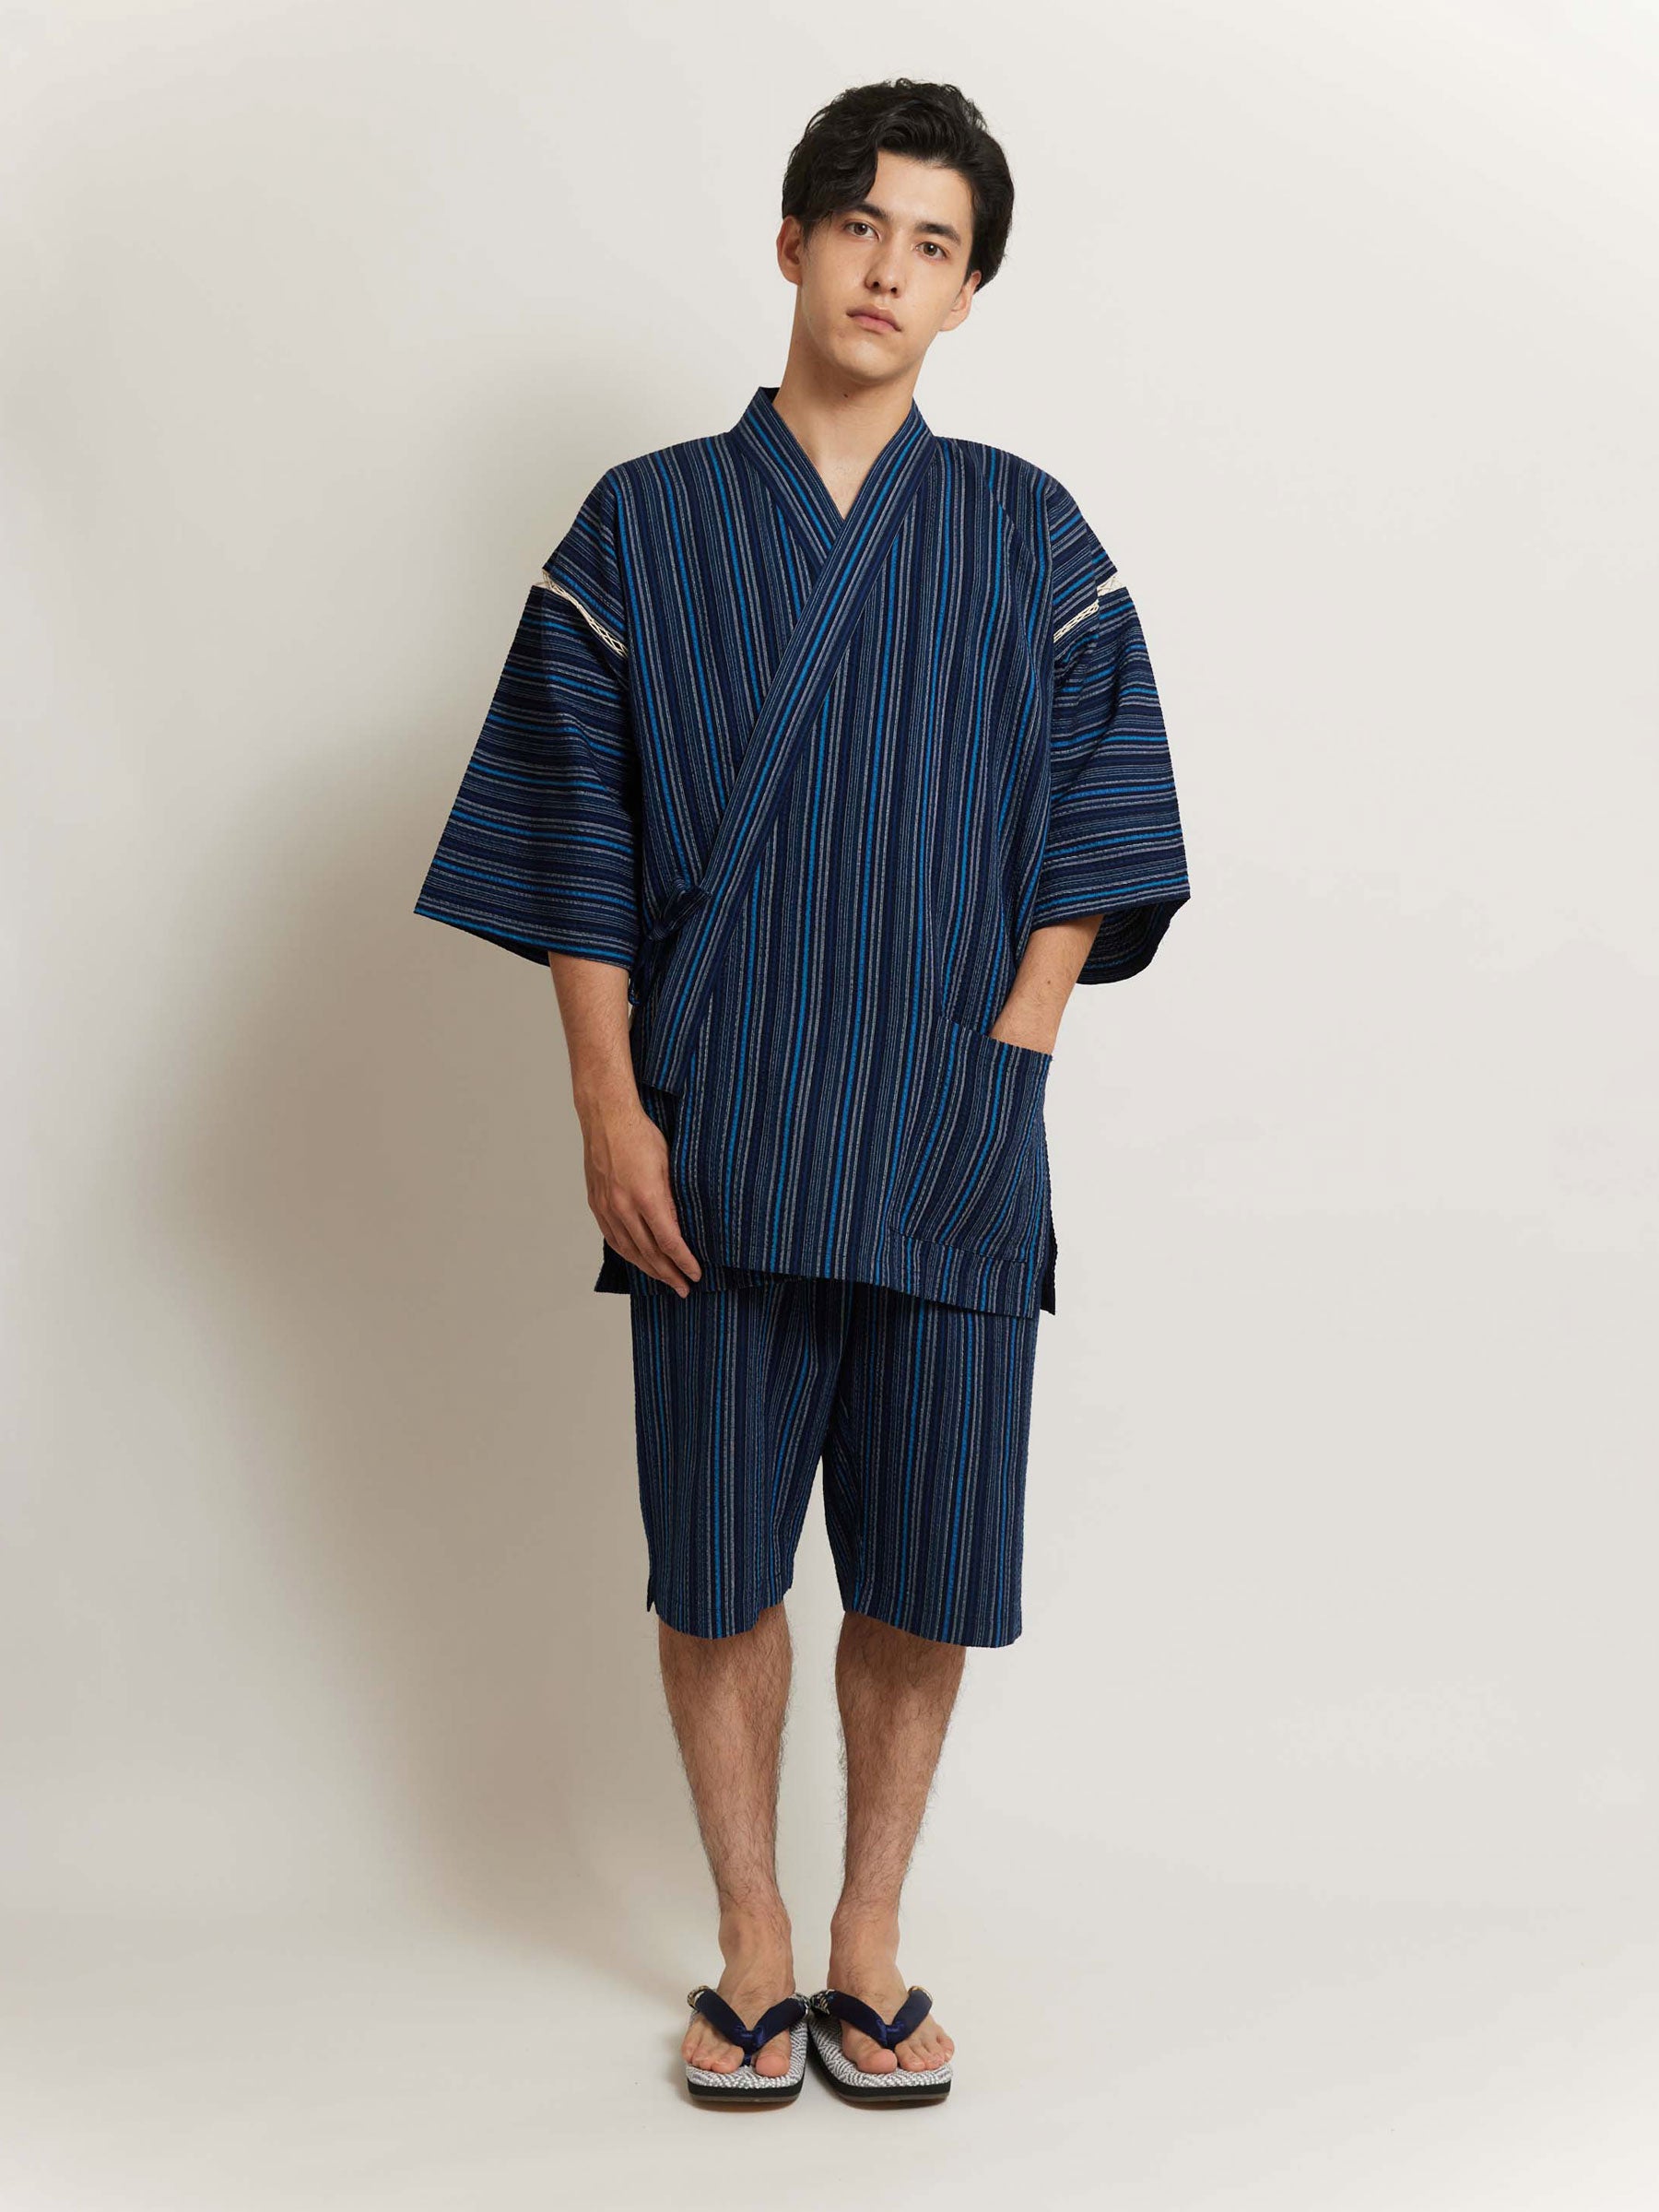 Aizome Jinbei Natural Cotton Shirt and Shorts | Japan Objects Store